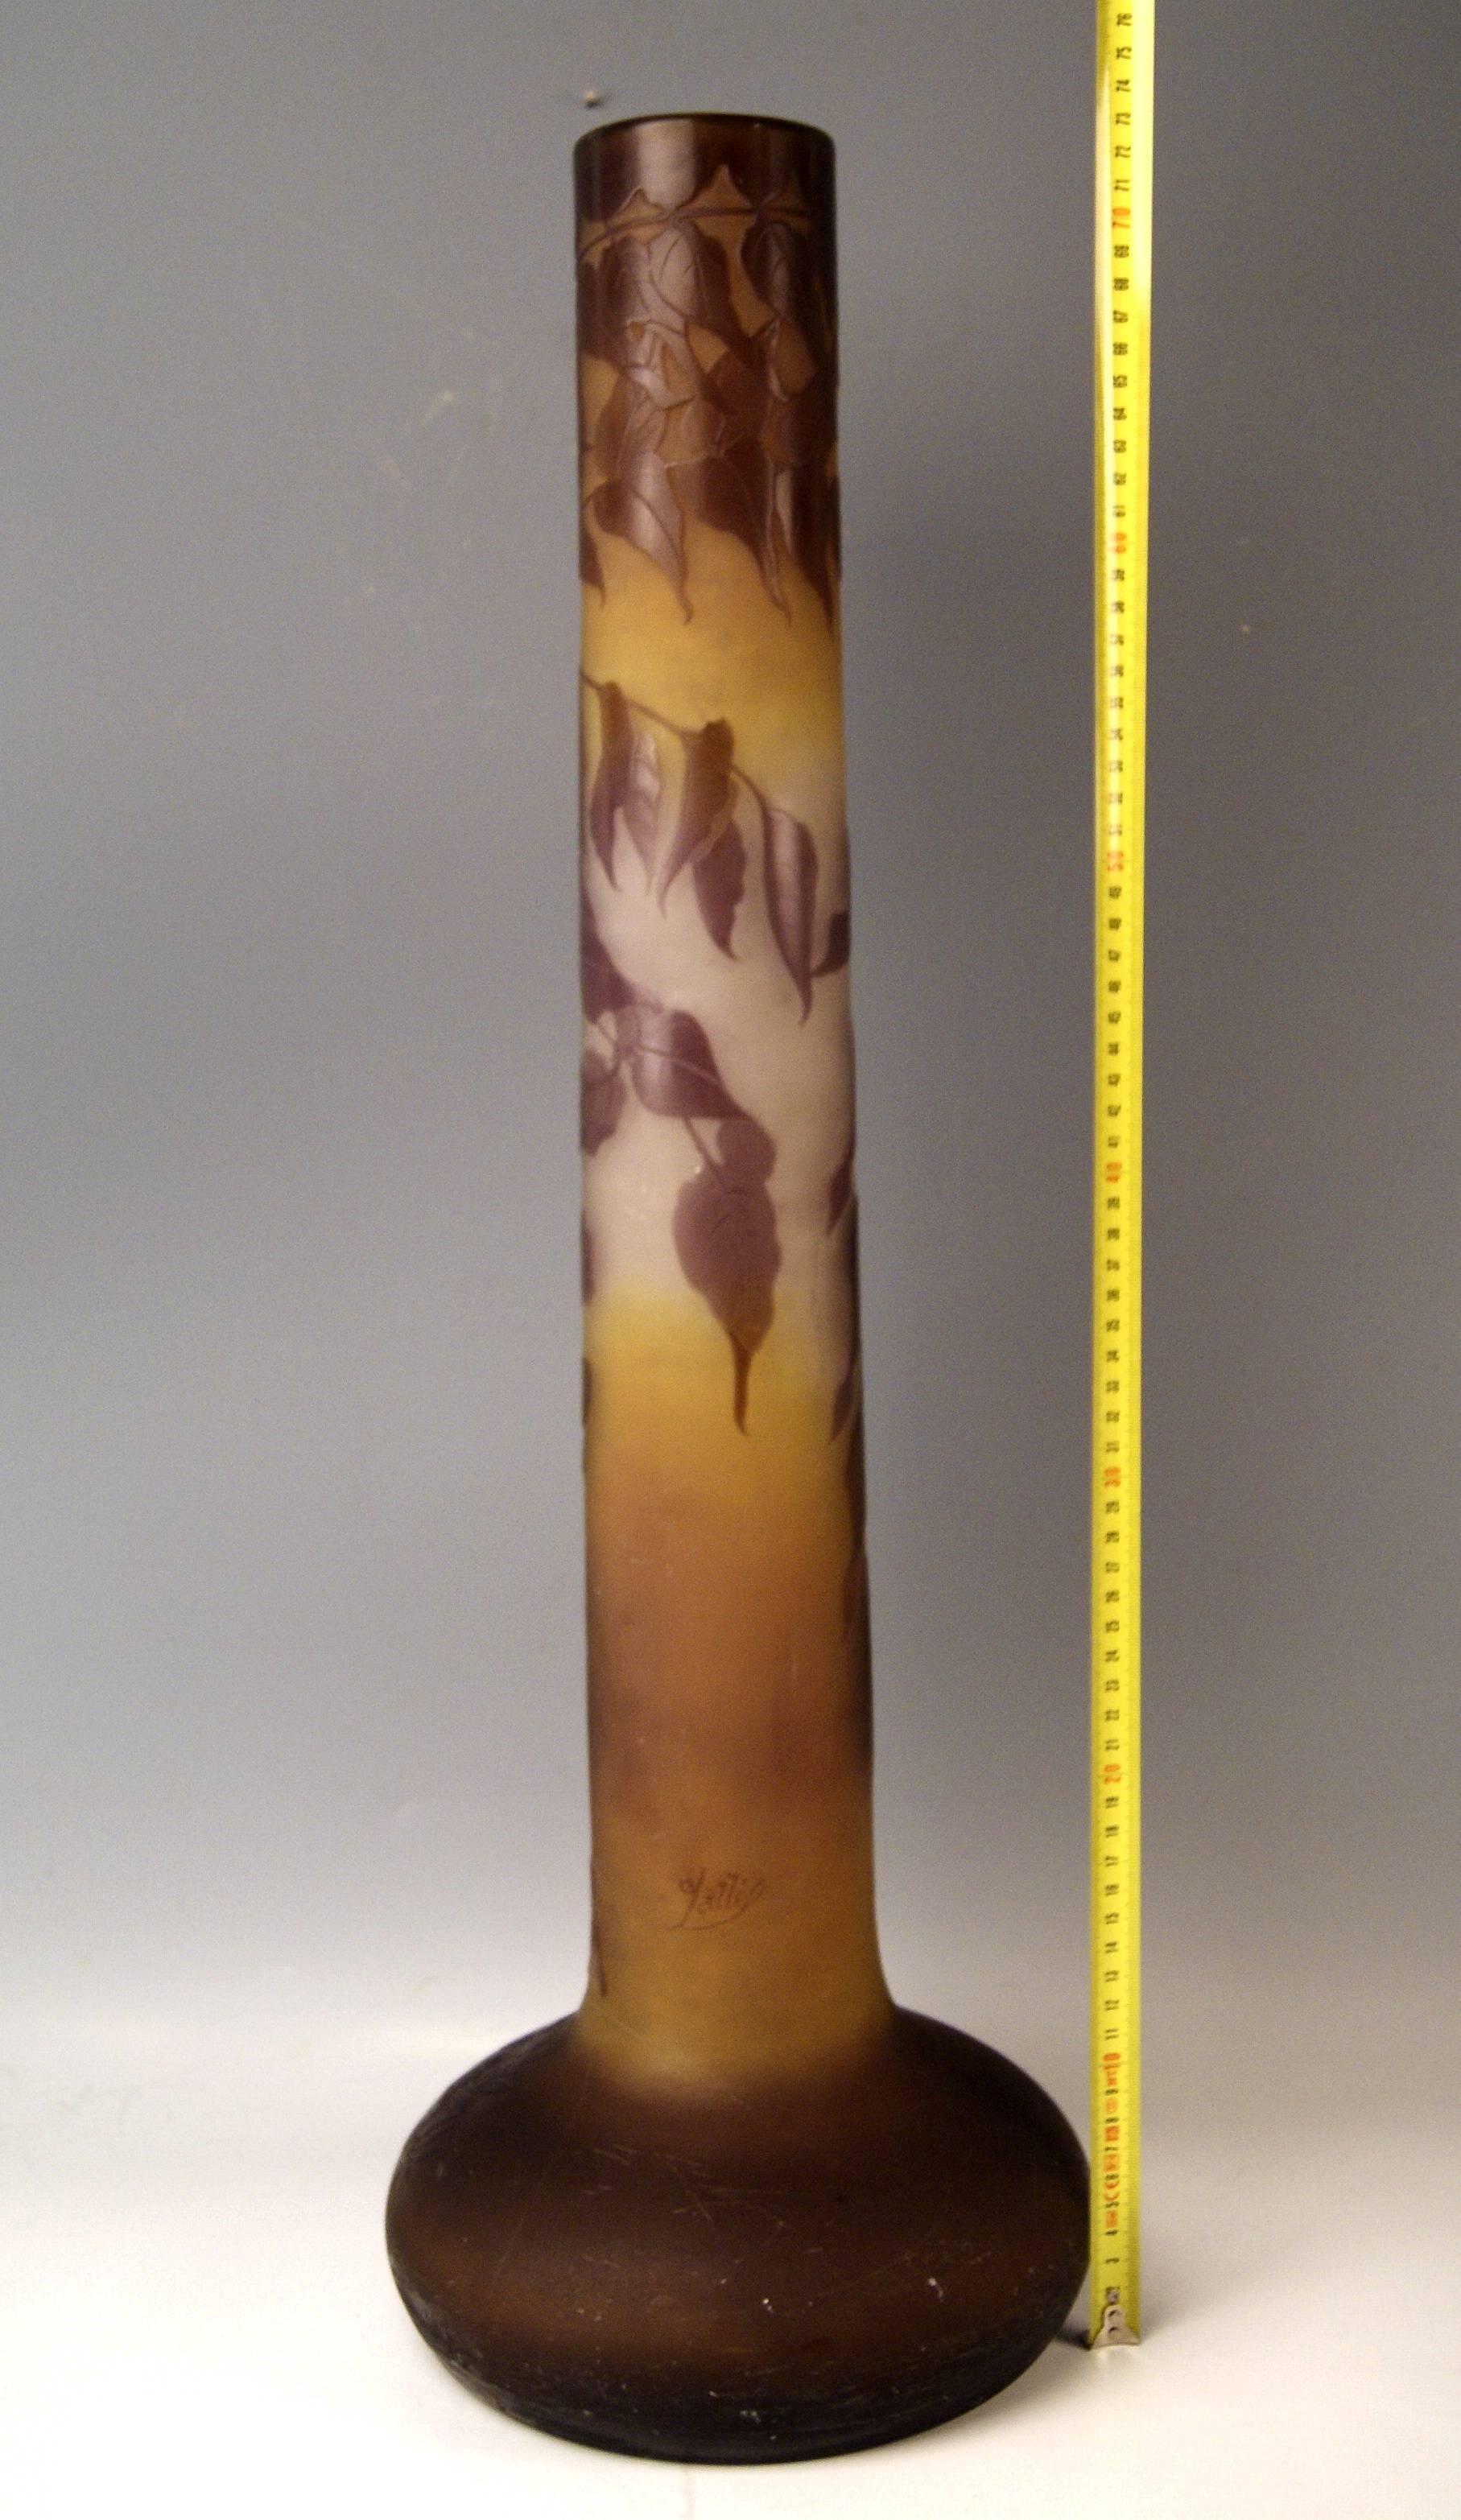 Galle Nancy Huge Art Nouveau Stalky Vase Wysteria, ca 1904, Height:29.33 inches 2